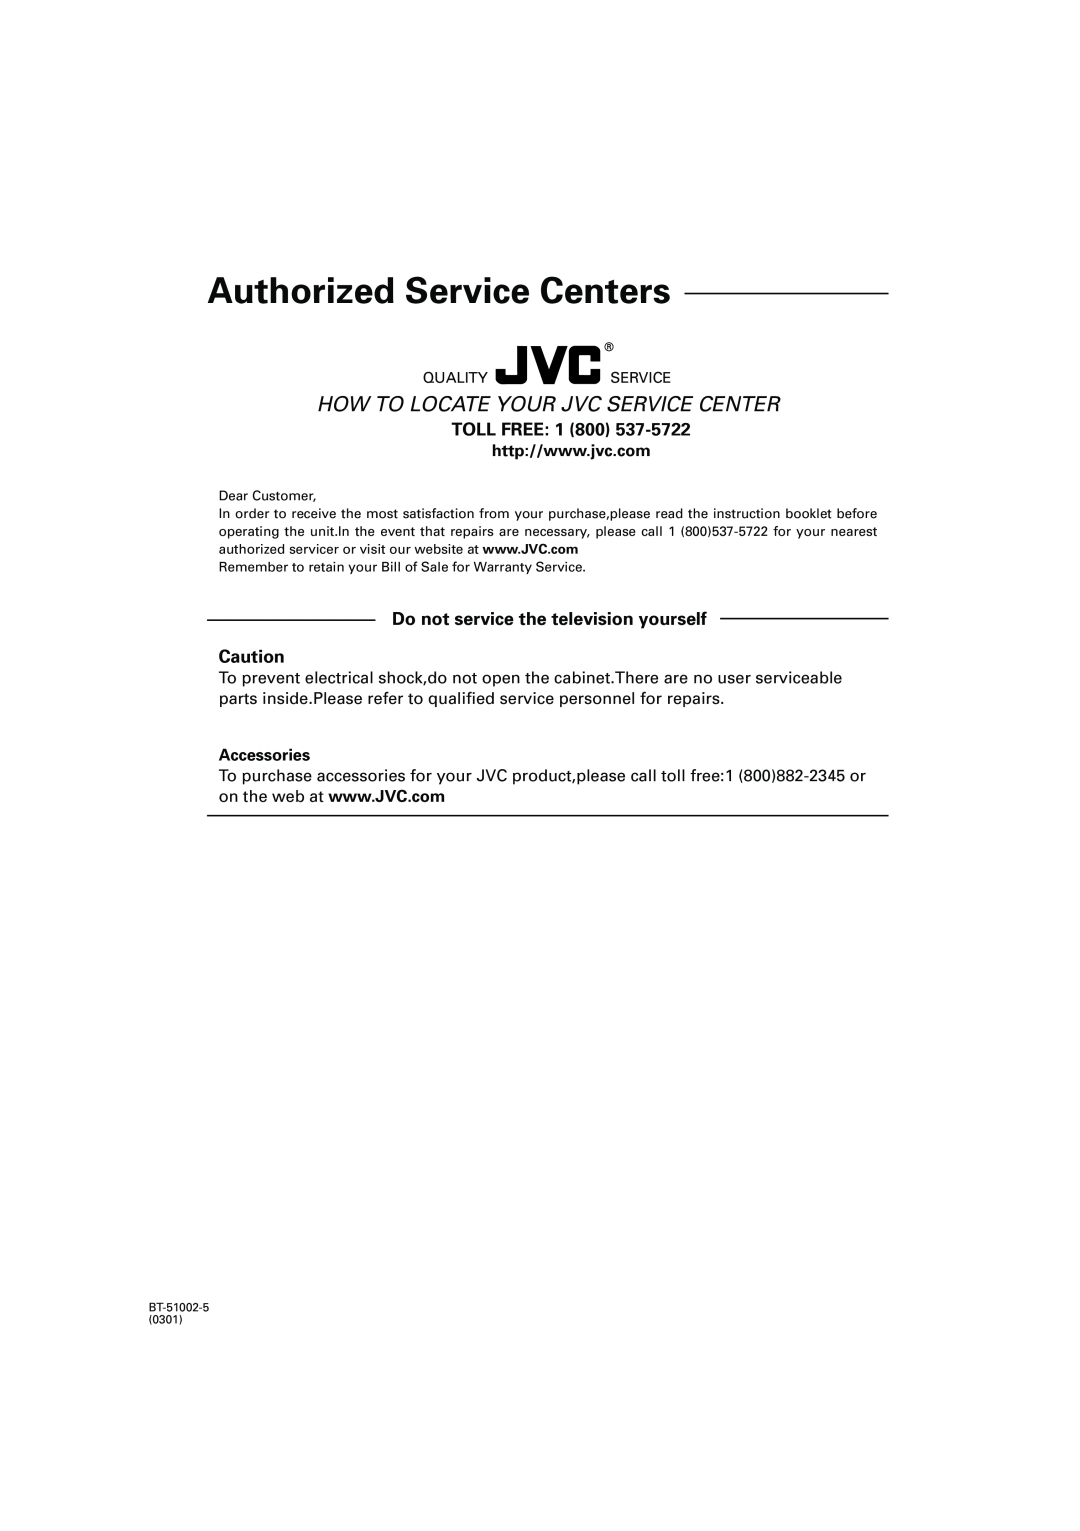 JVC RX-ES1SL manual Authorized Service Centers, How To Locate Your Jvc Service Center, TOLL FREE 1, Accessories 